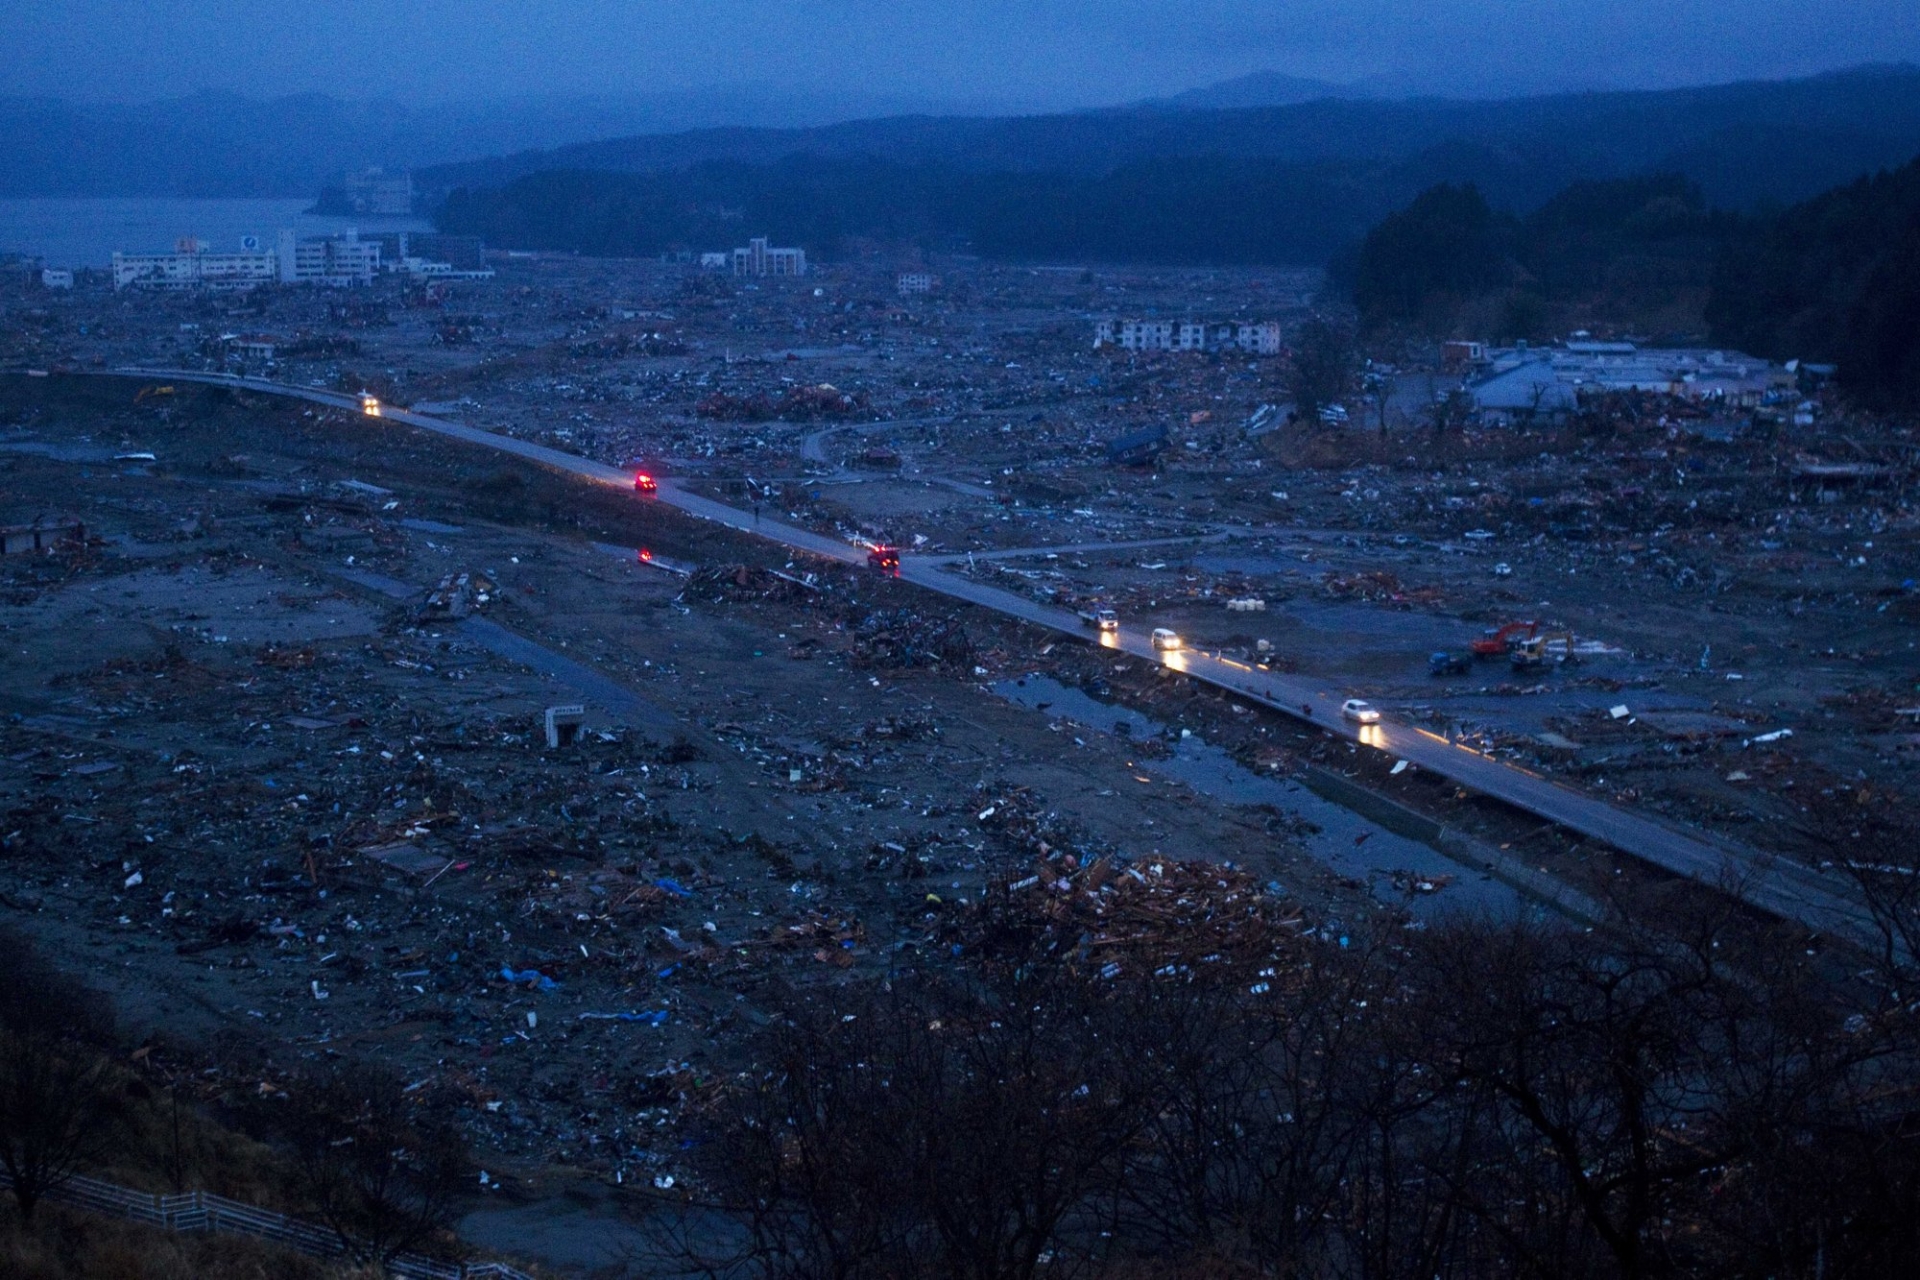 Japan: A decade later after the catastrophic tsunami